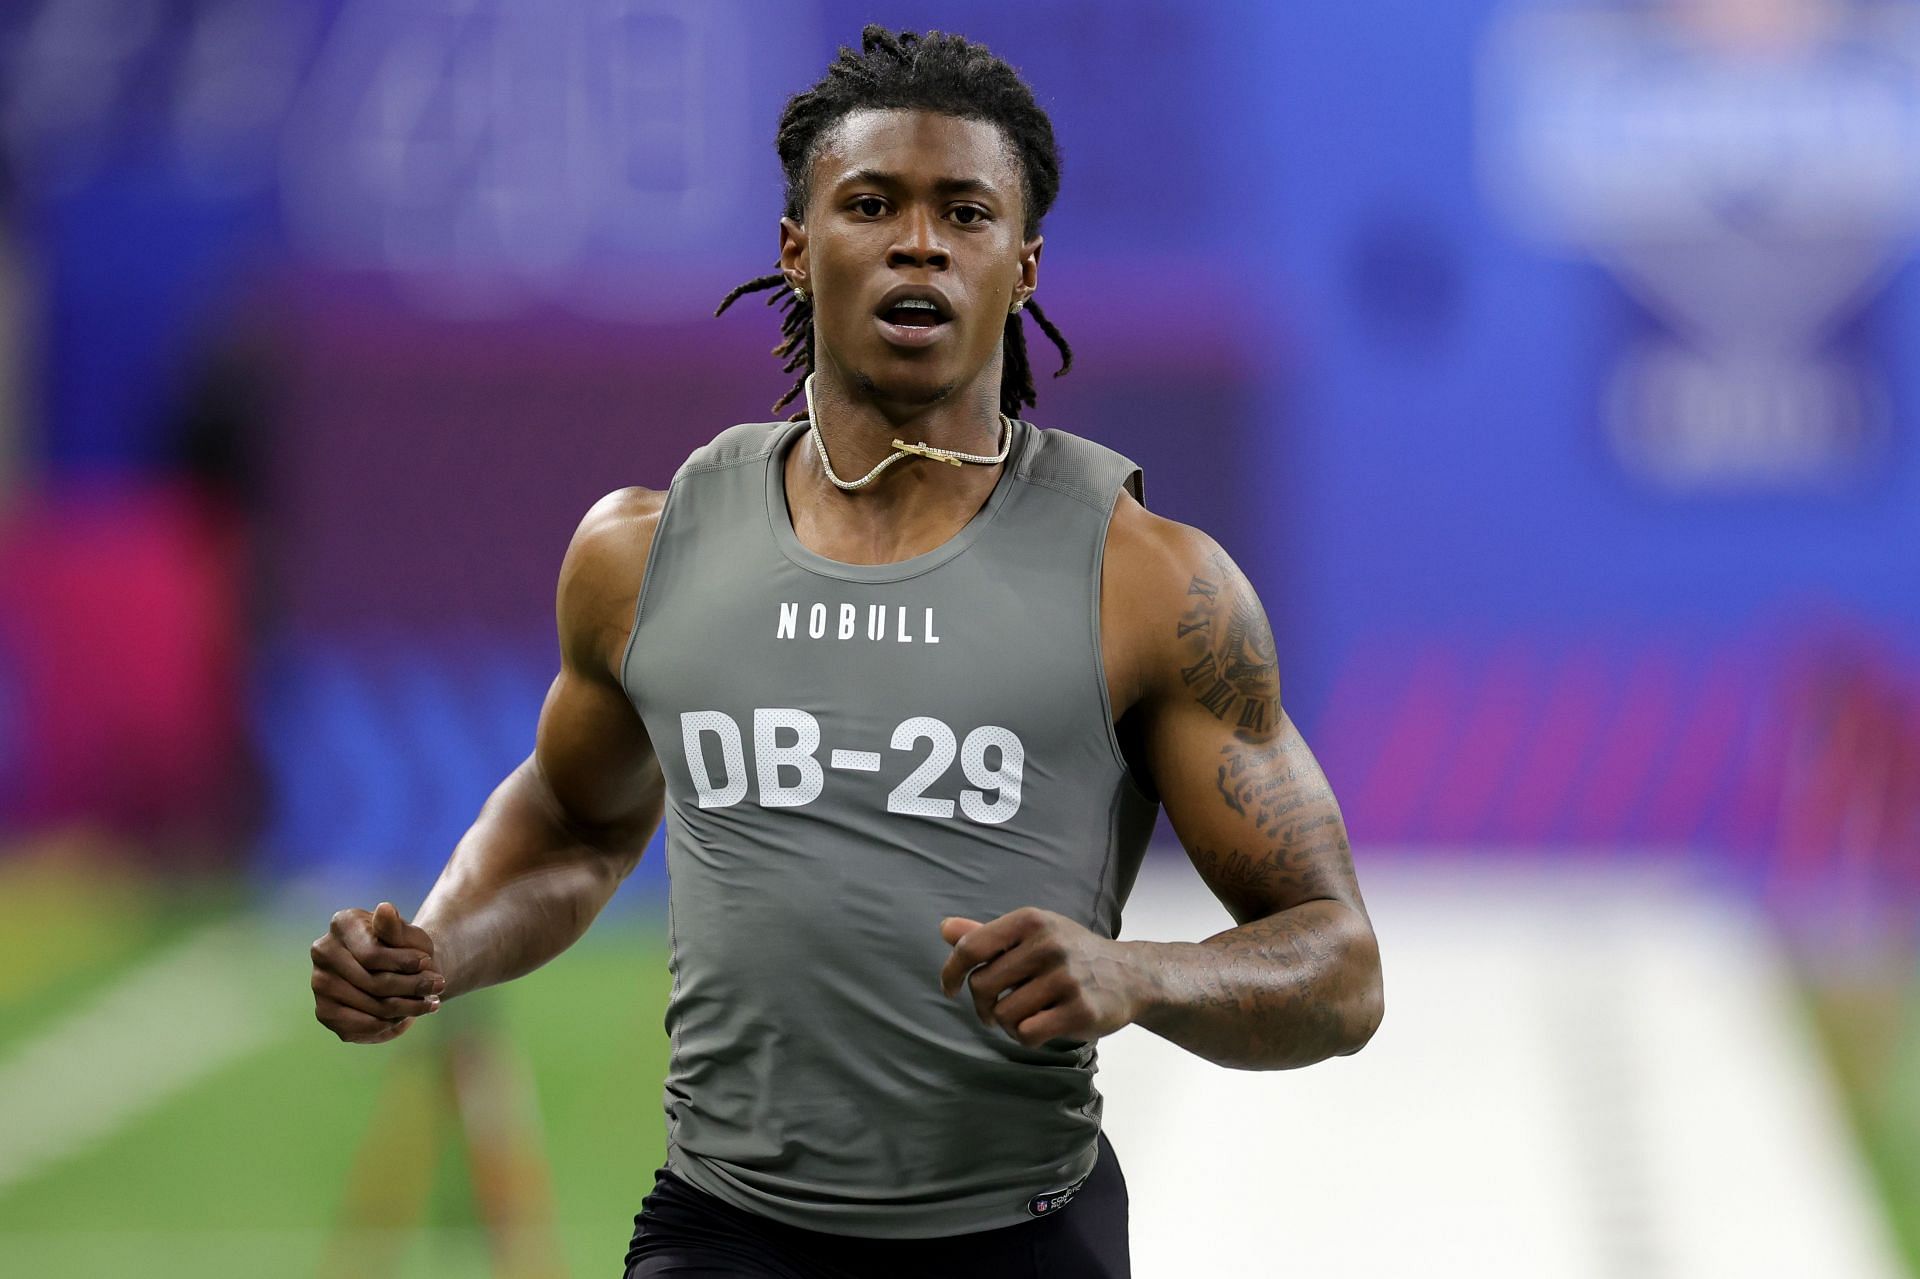 Defensive back Cam Smith of South Carolina participates in the 40-yard dash during the NFL Combine